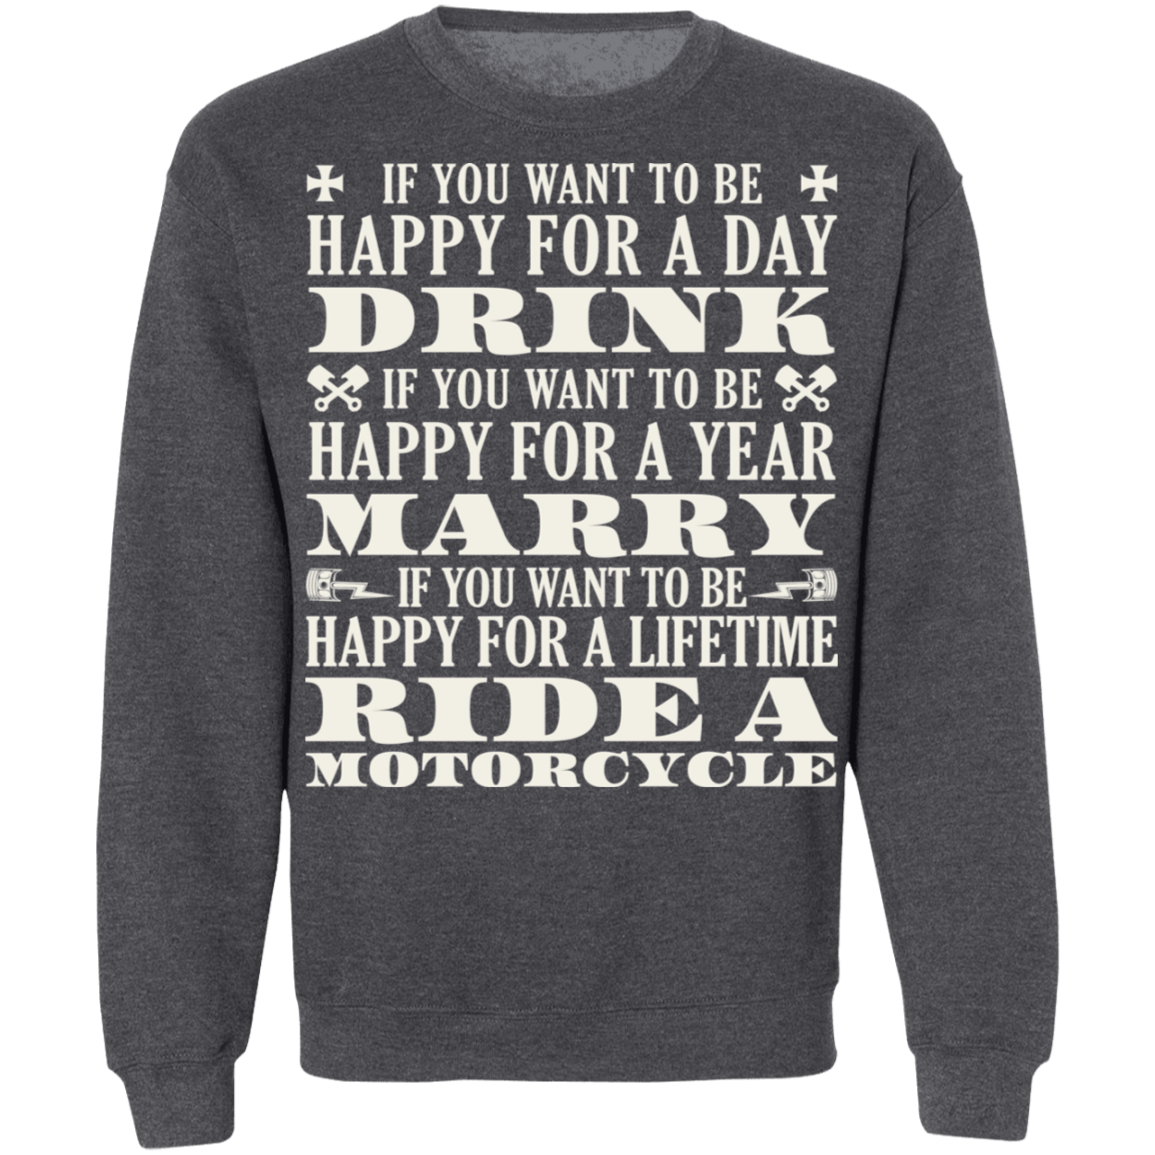 If you want to be happy for a day, drink Shirt